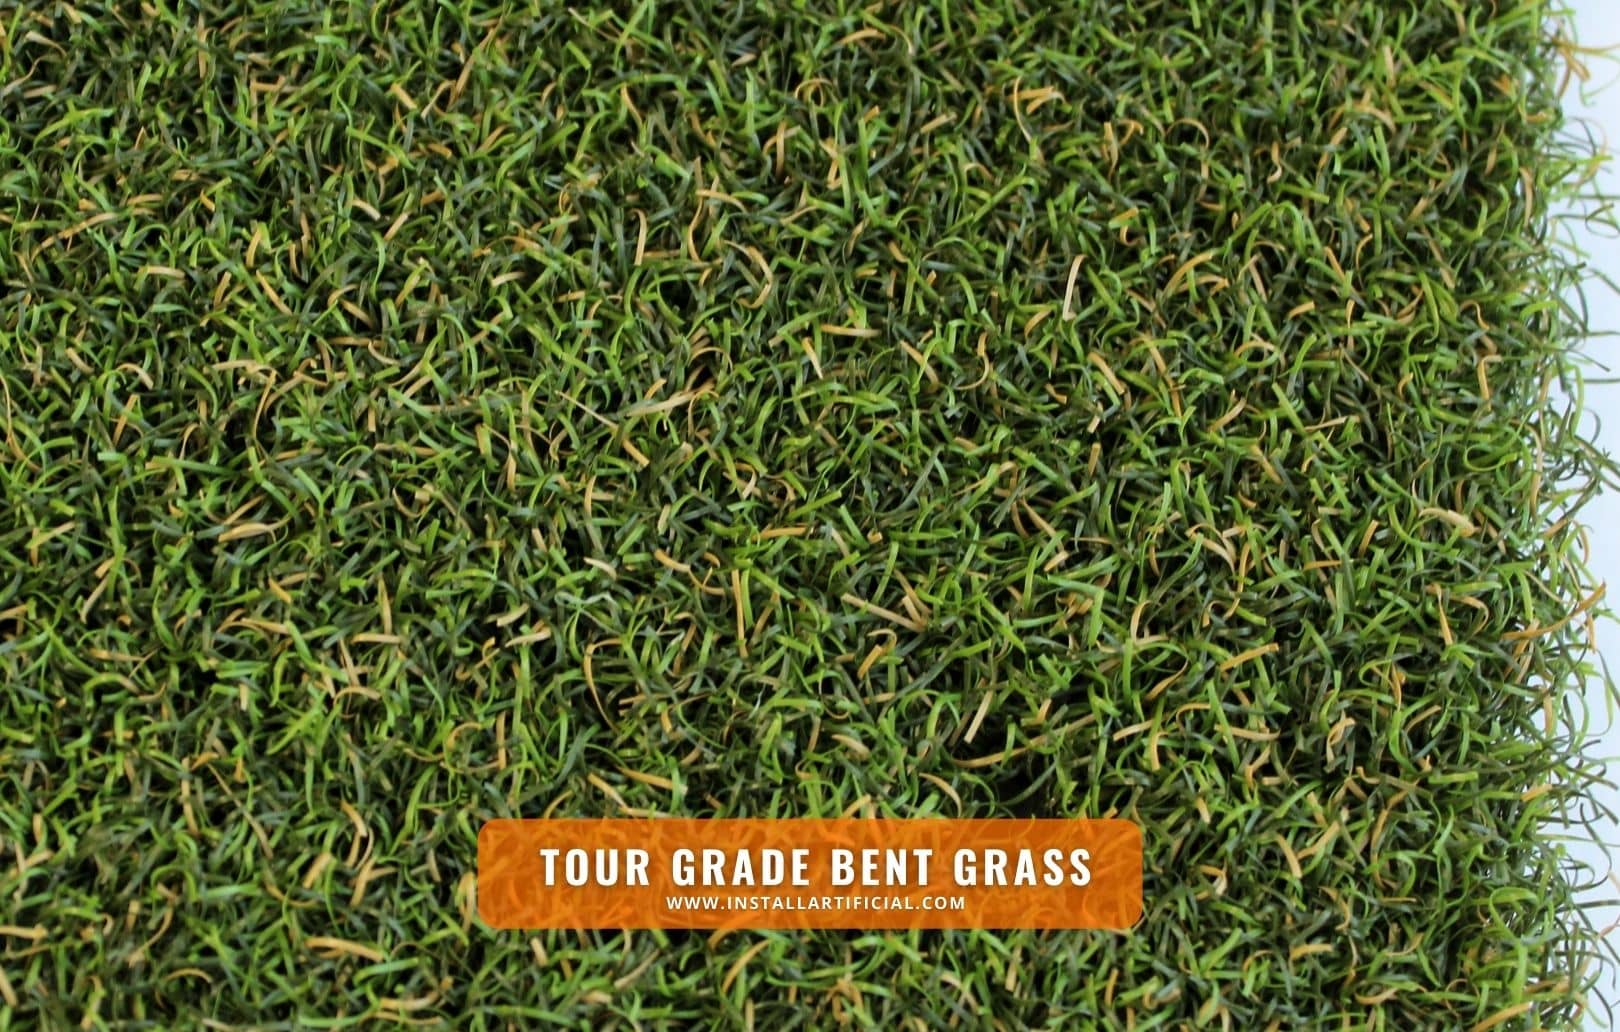 Tour Grade Bent Grass, Imperial Synthetic Turf,  top